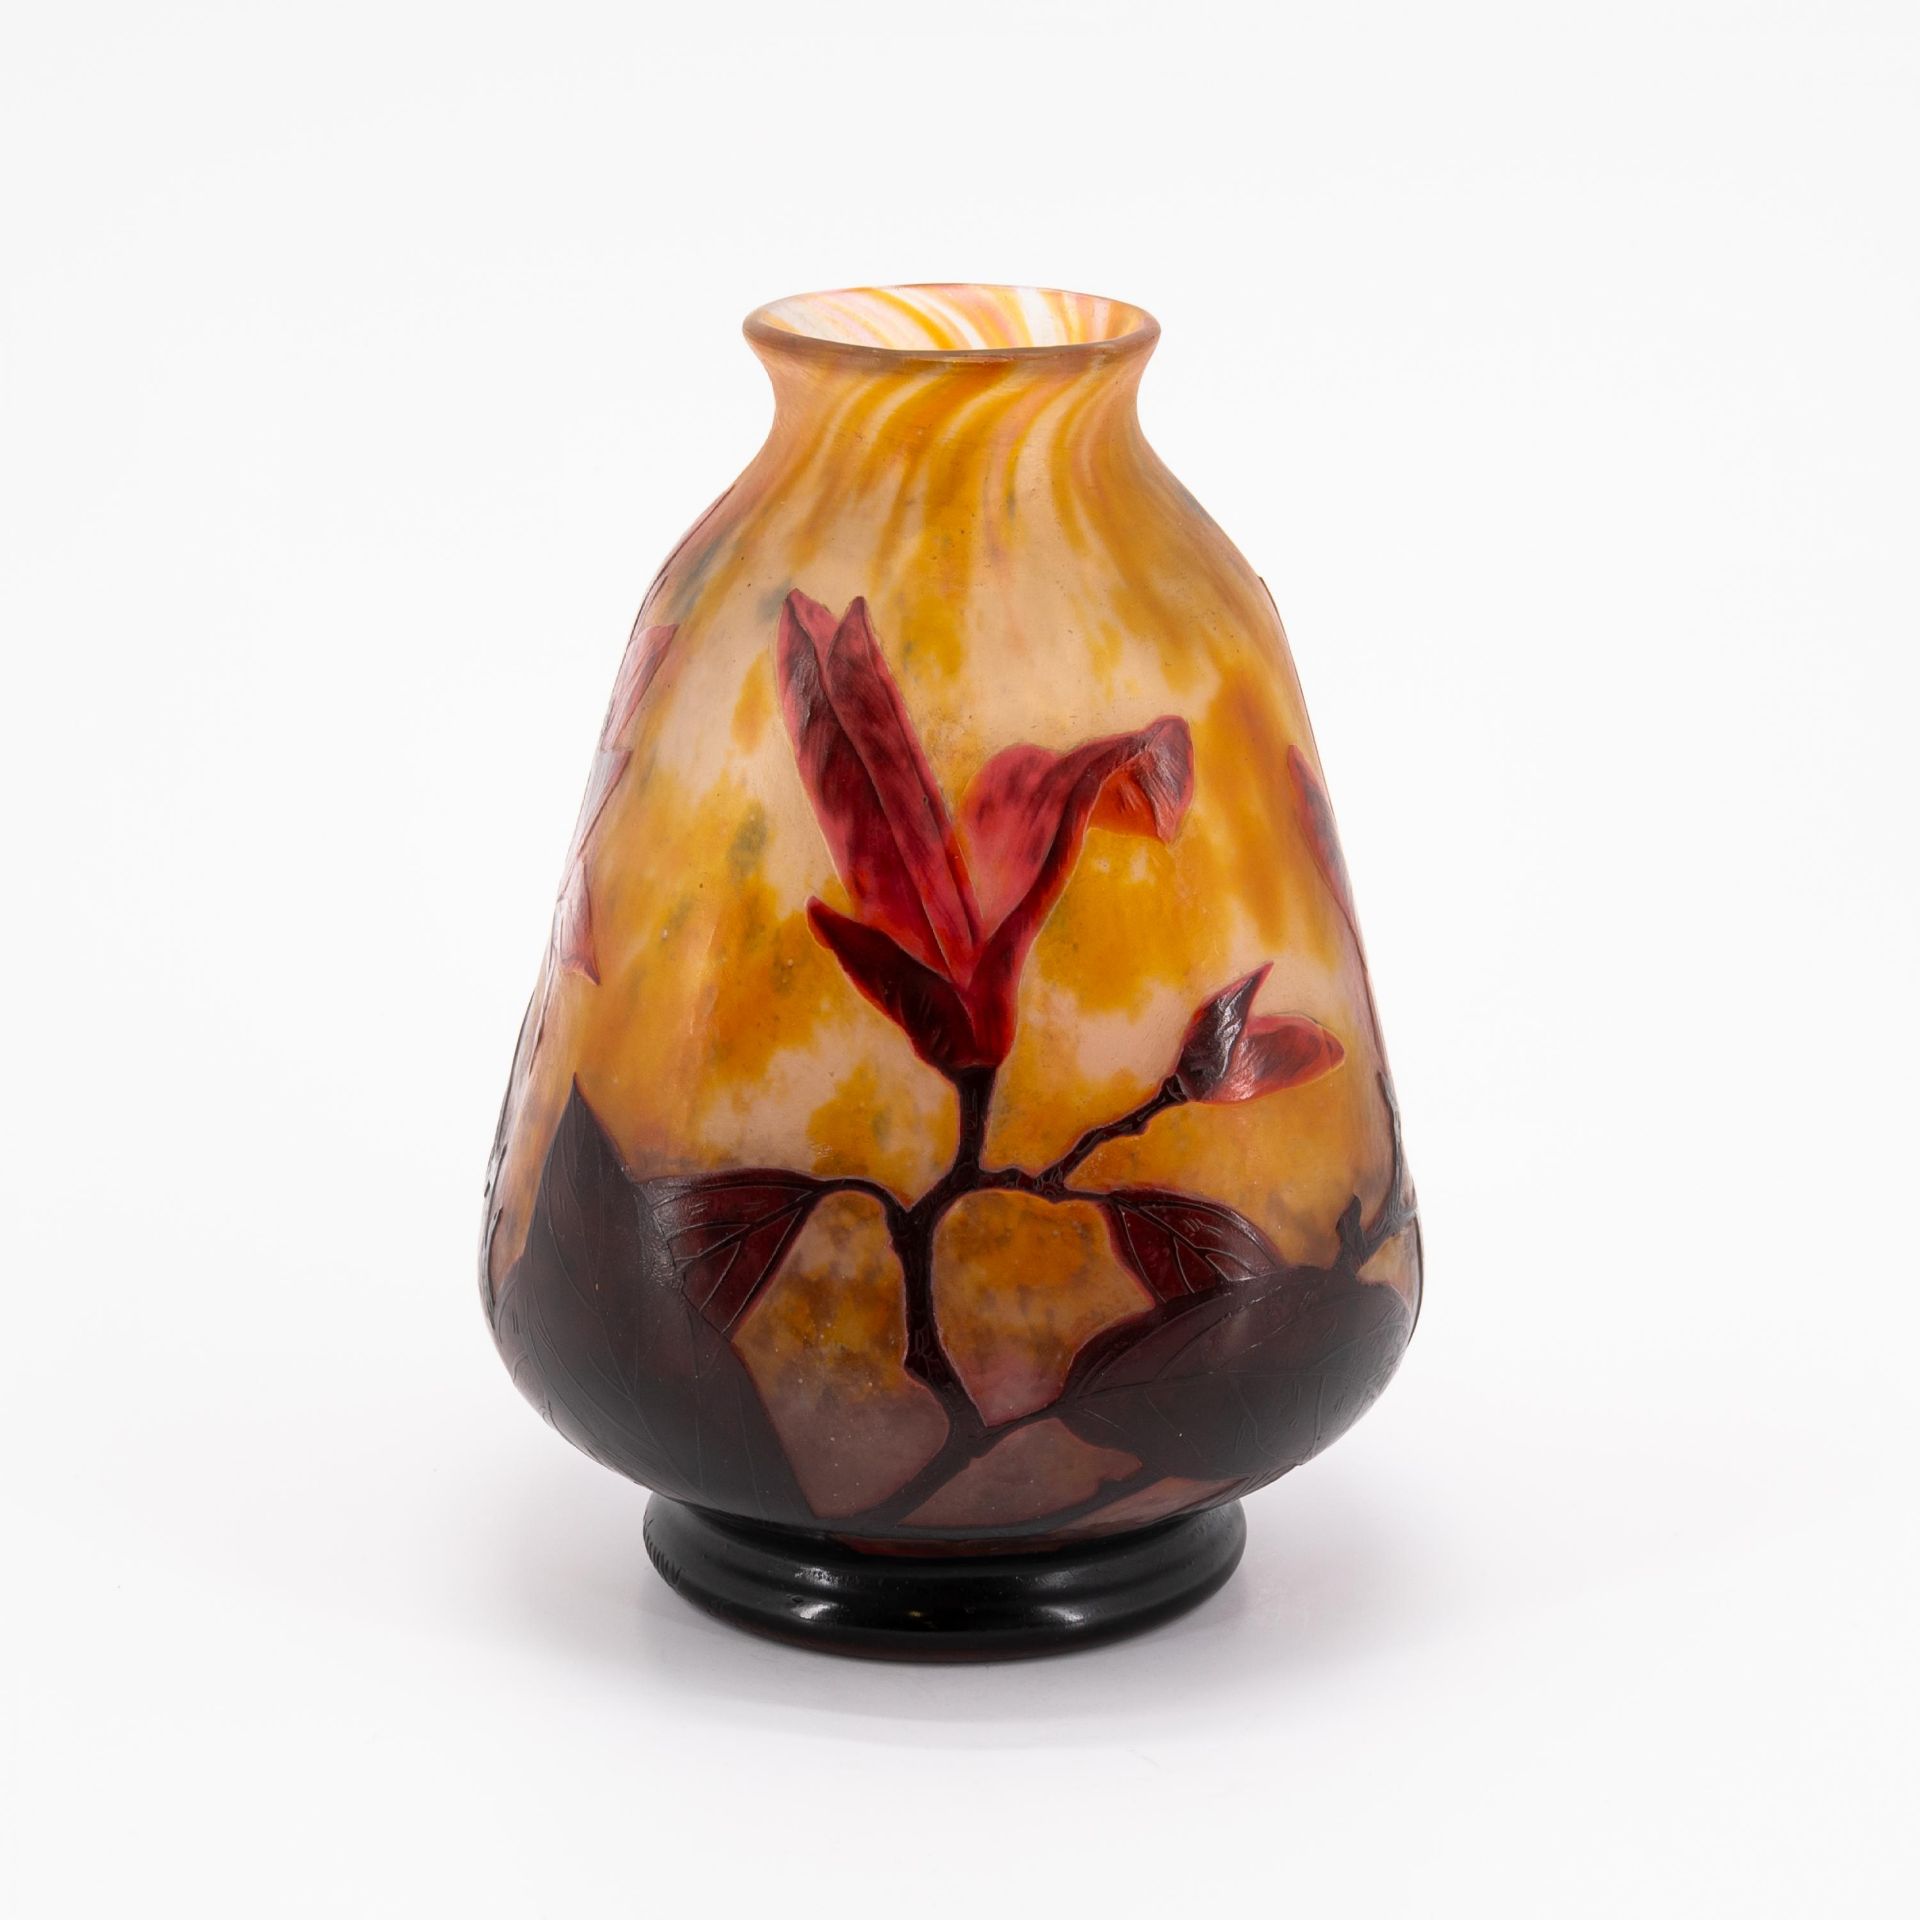 GLASS VASE WITH MAGNOLIA BRANCHES - Image 2 of 7